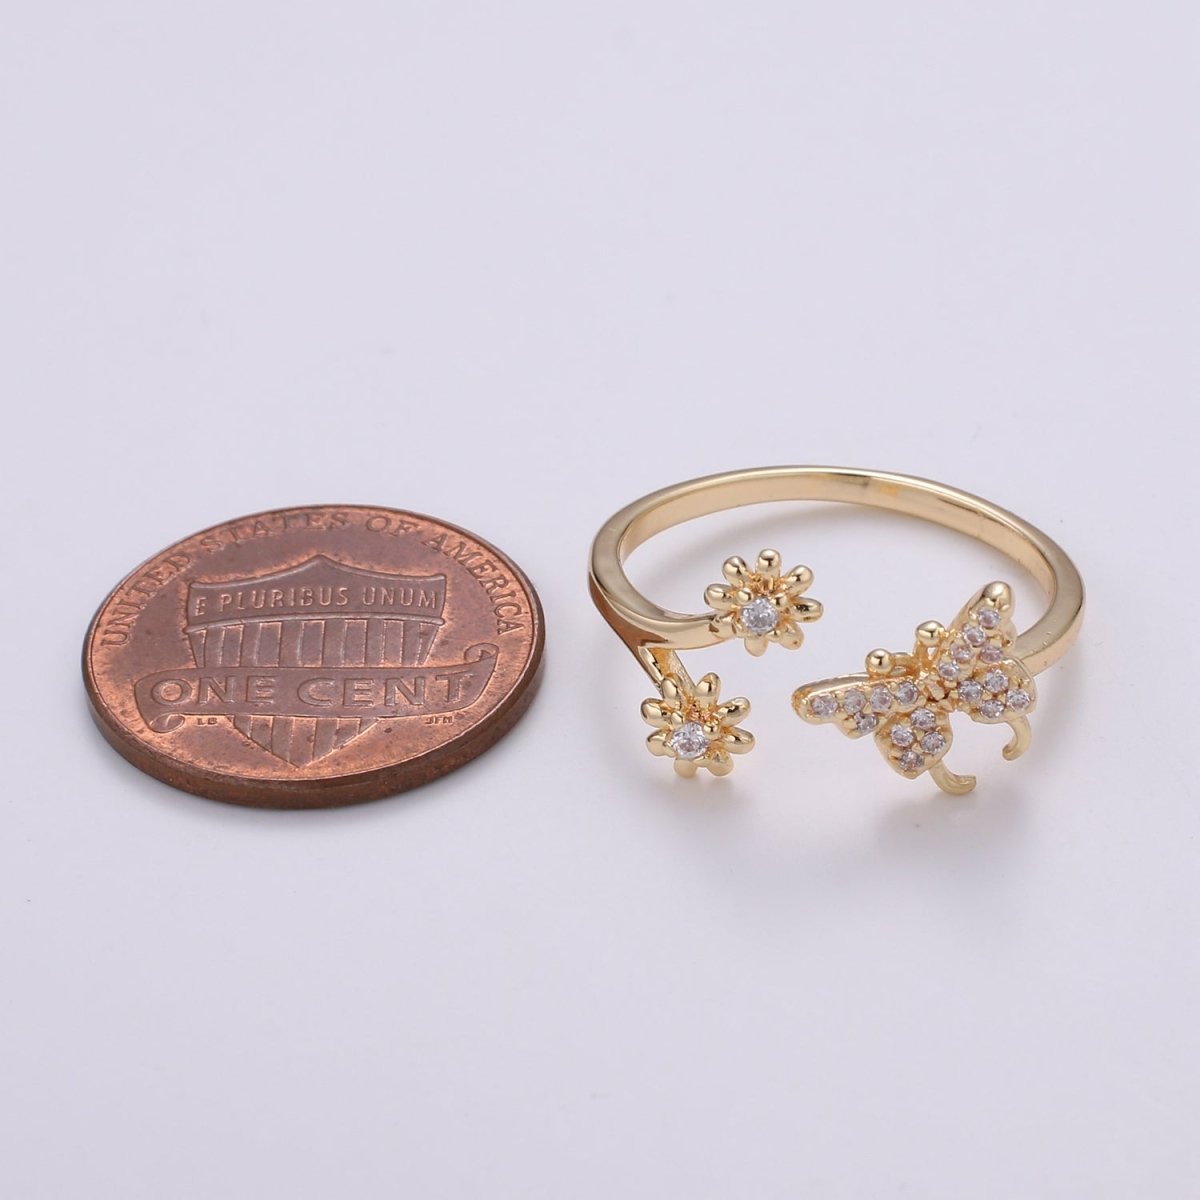 Dainty Elegant Butterfly and Flower 18K Gold Filled Adjustable Ring - R-271 - DLUXCA